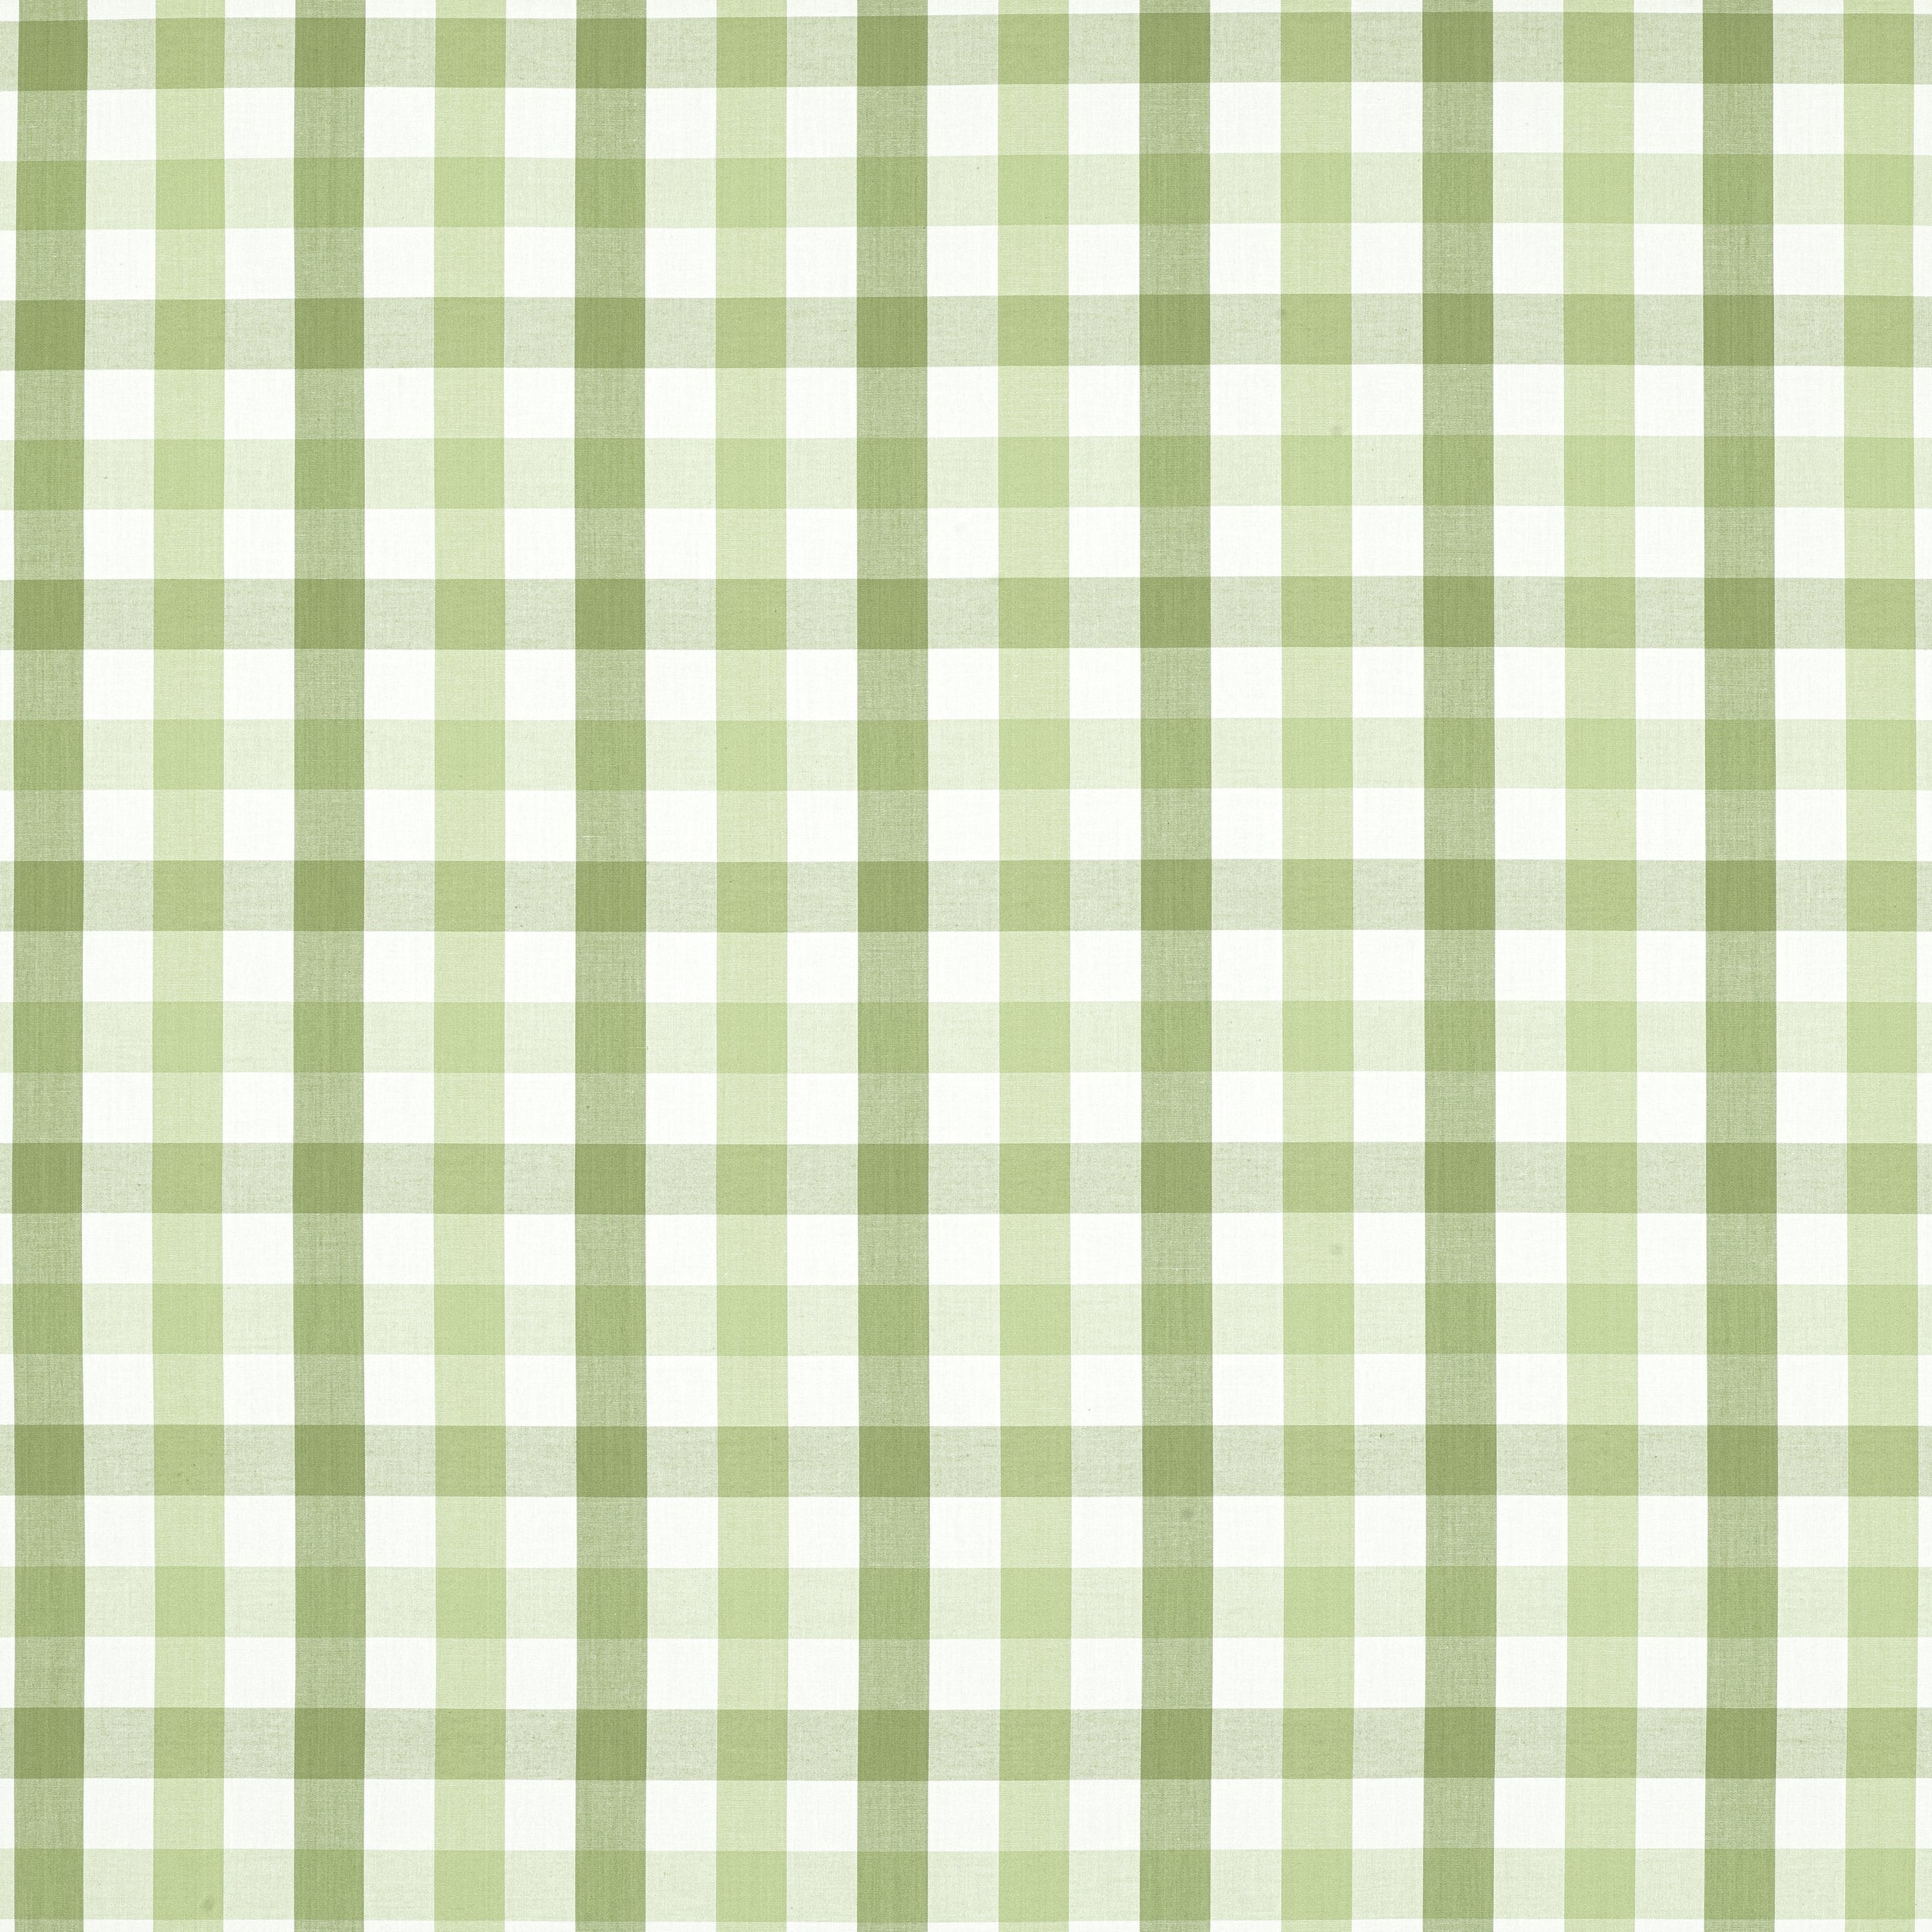 Saybrook Check fabric in green color - pattern number AW15145 - by Anna French in the Antilles collection